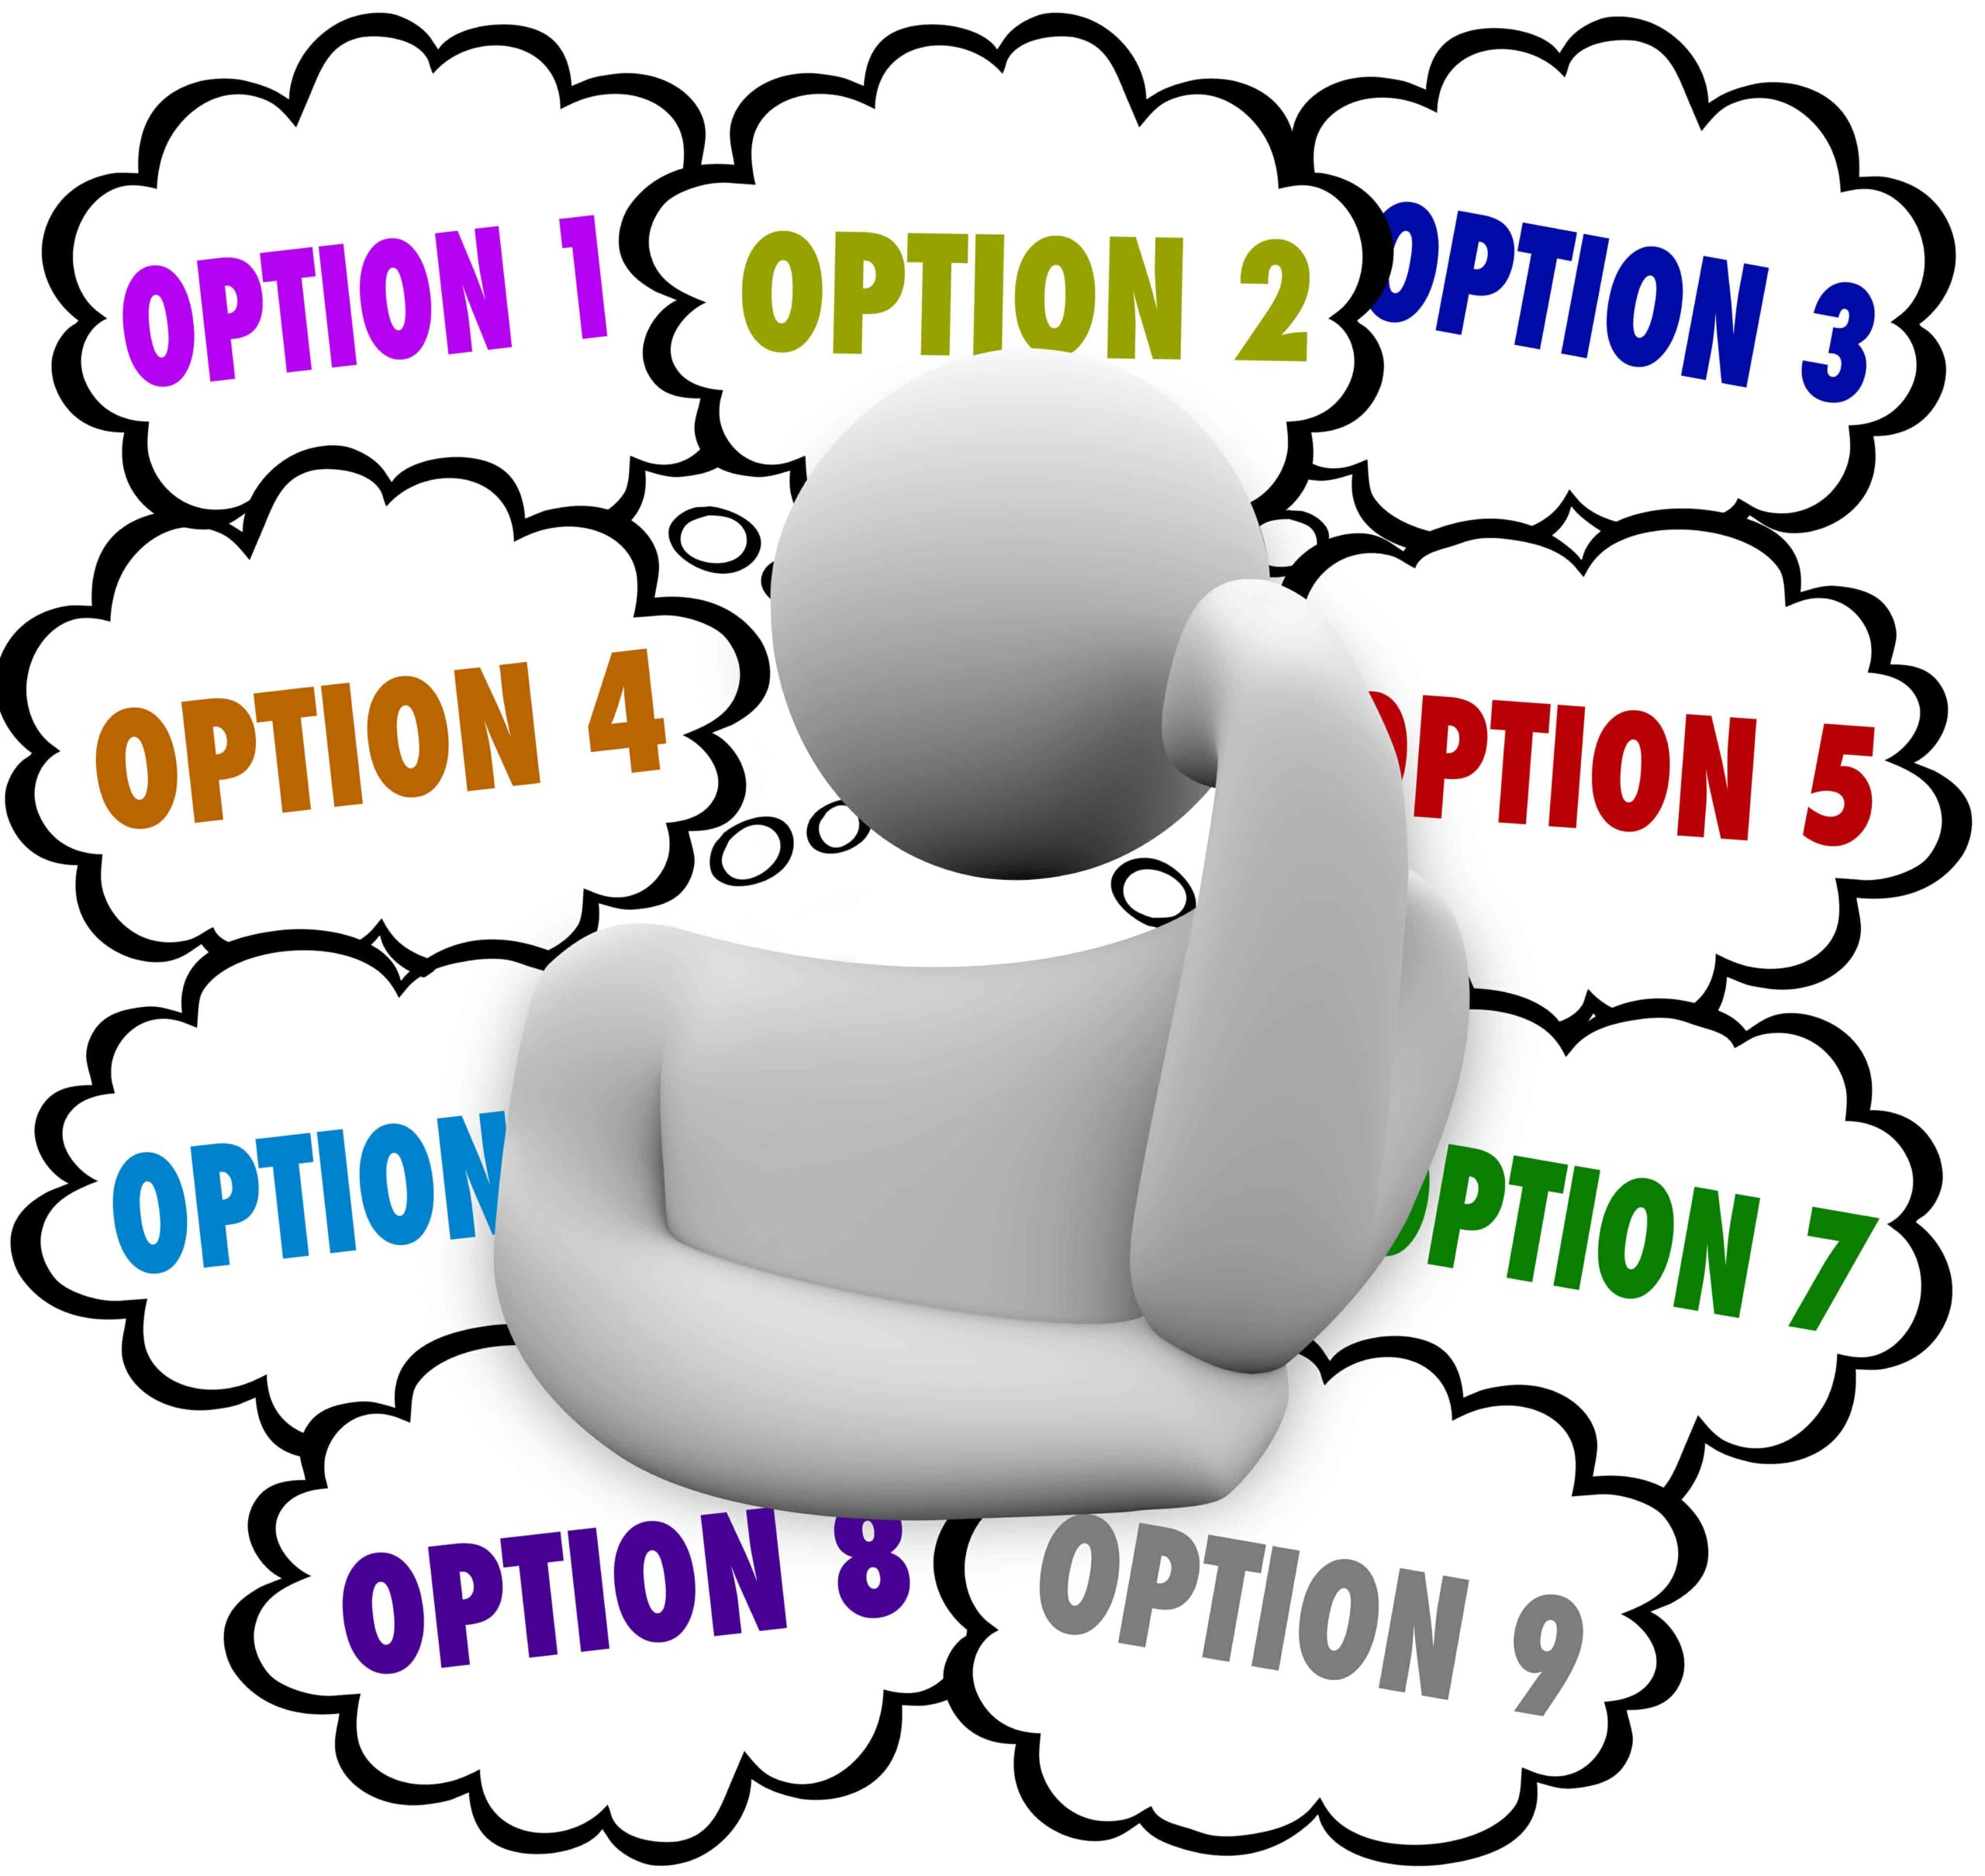 3D figure surrounded by thought bubbles saying "Option 1, Option 2," etc. symbolizing how to negotiate 